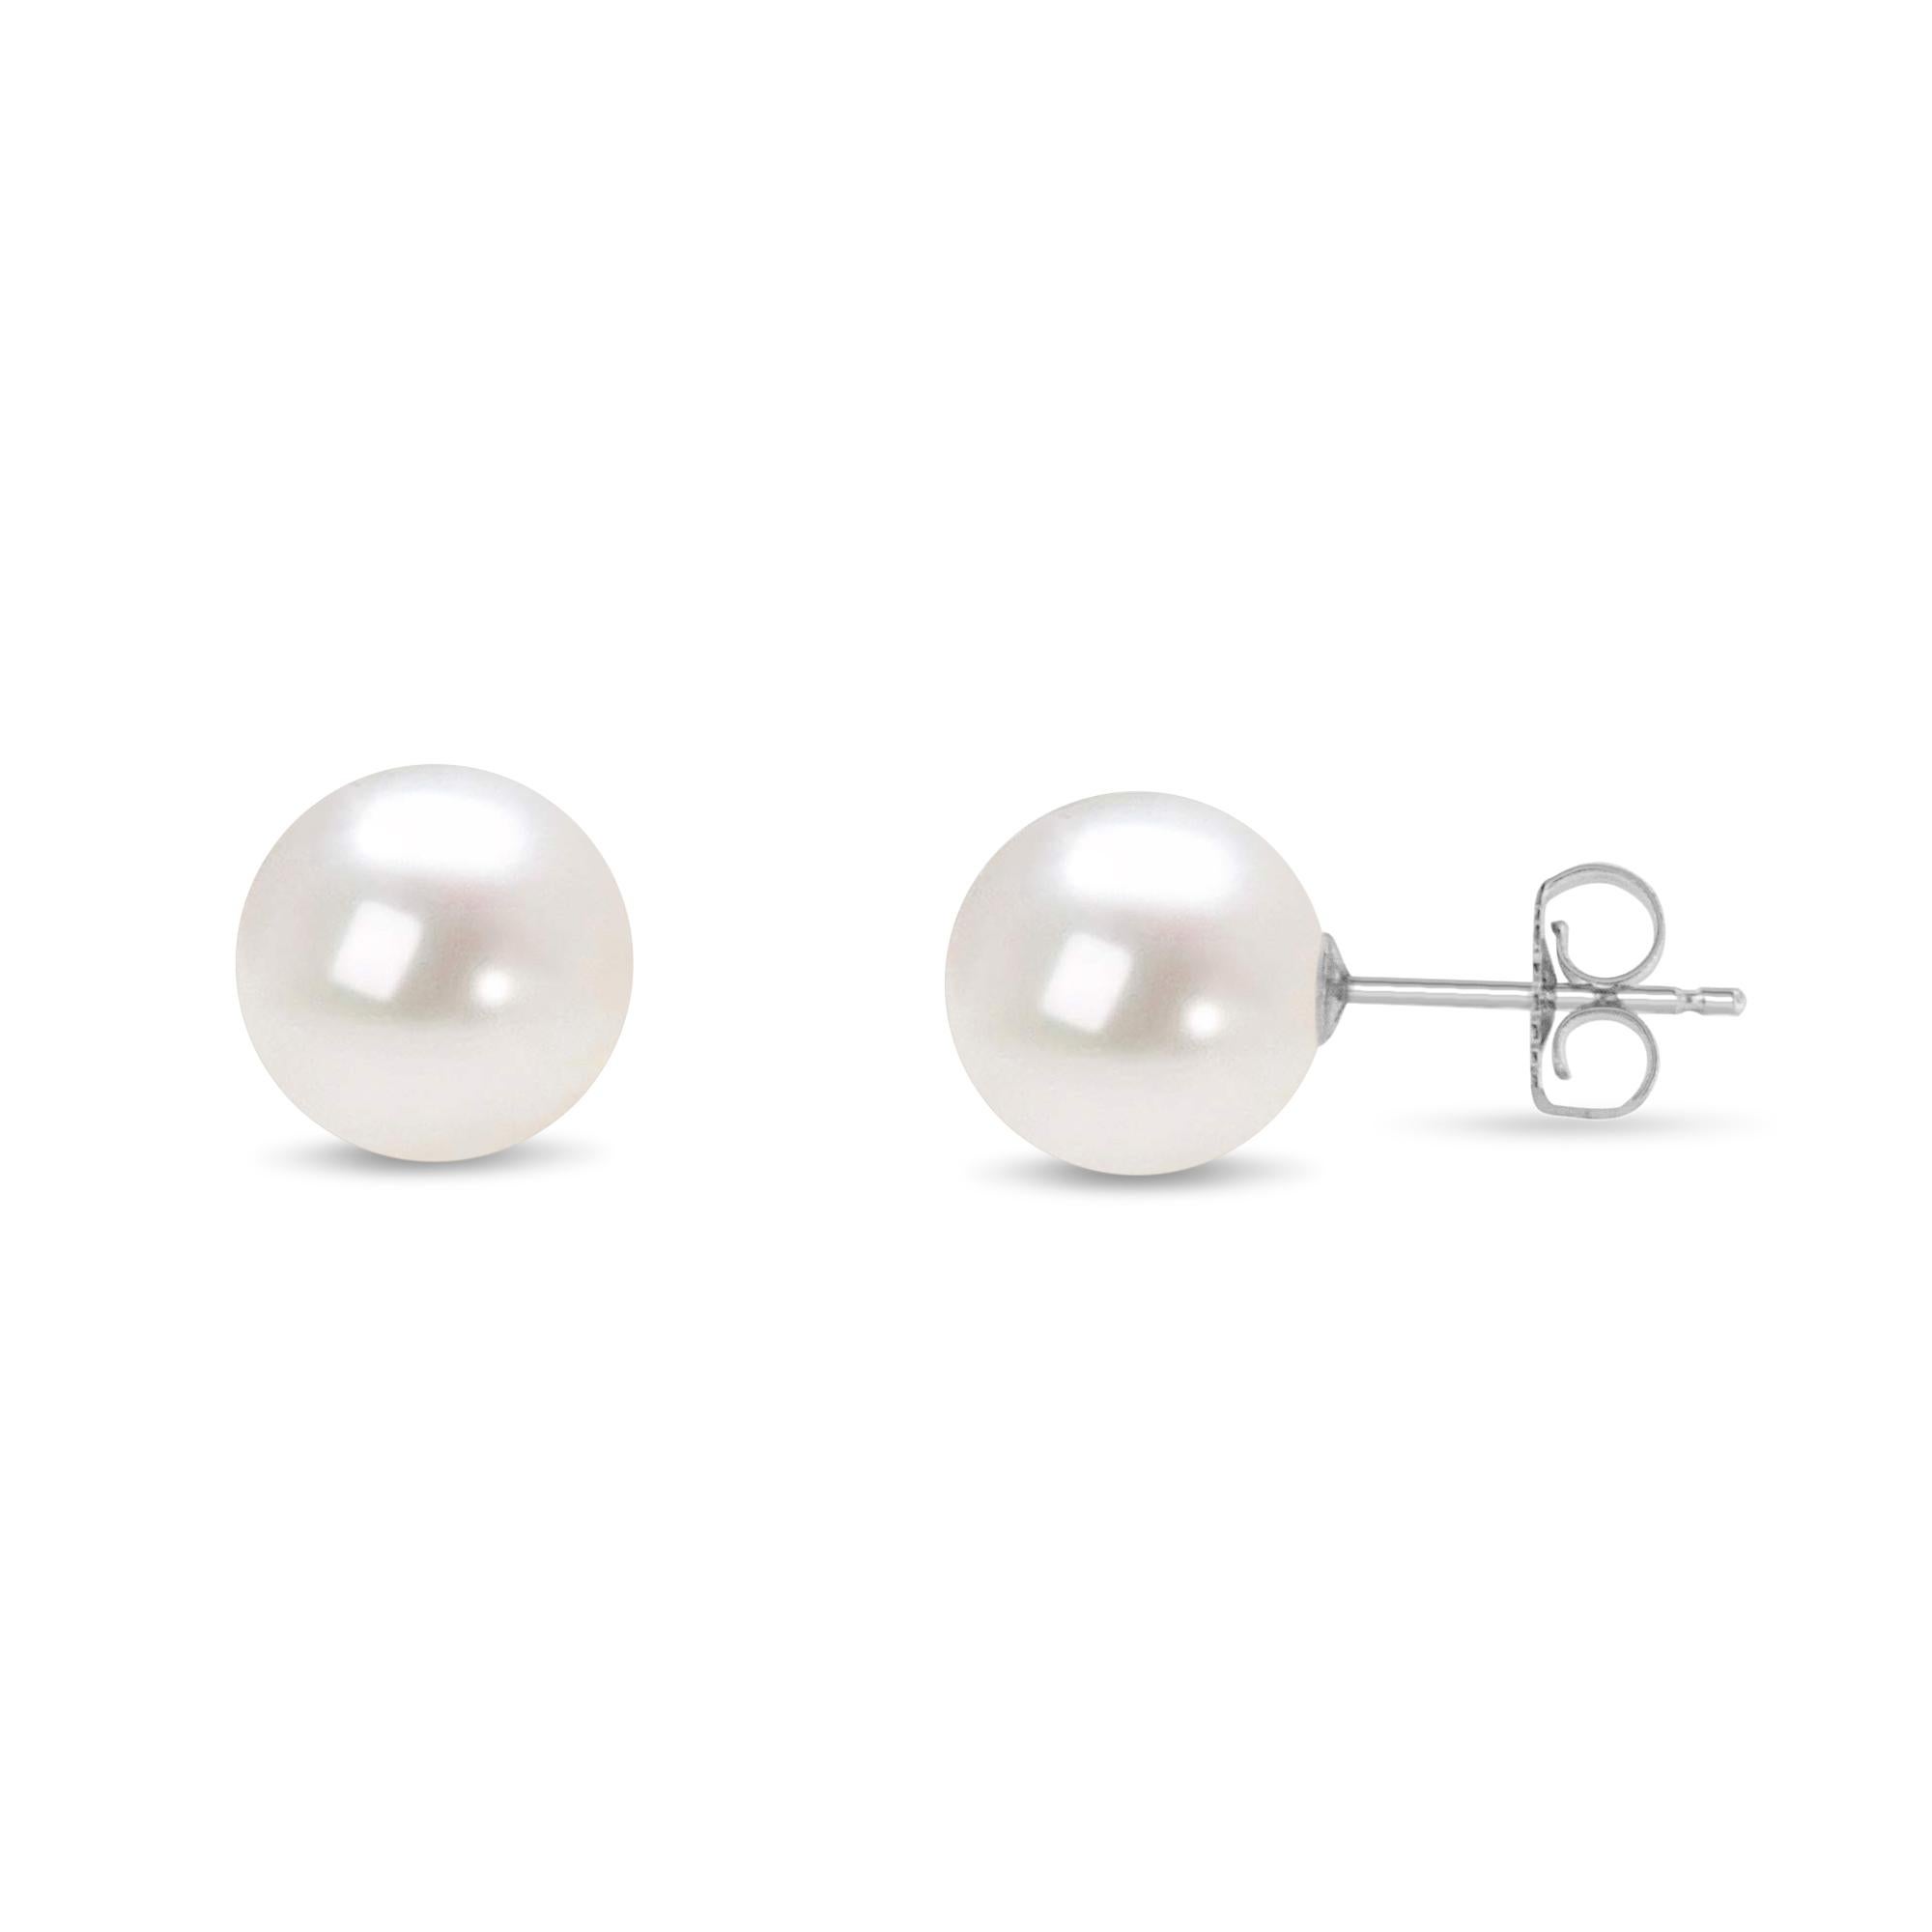 Sweet, sophisticated and seemingly simple, our stunning Akoya Pearls are totally enchanting, with an ever-vibrant luminosity dancing across their radiant surfaces. These 8-8.5MM, cultured white with pink overtone Akoya Pearls are of the highest